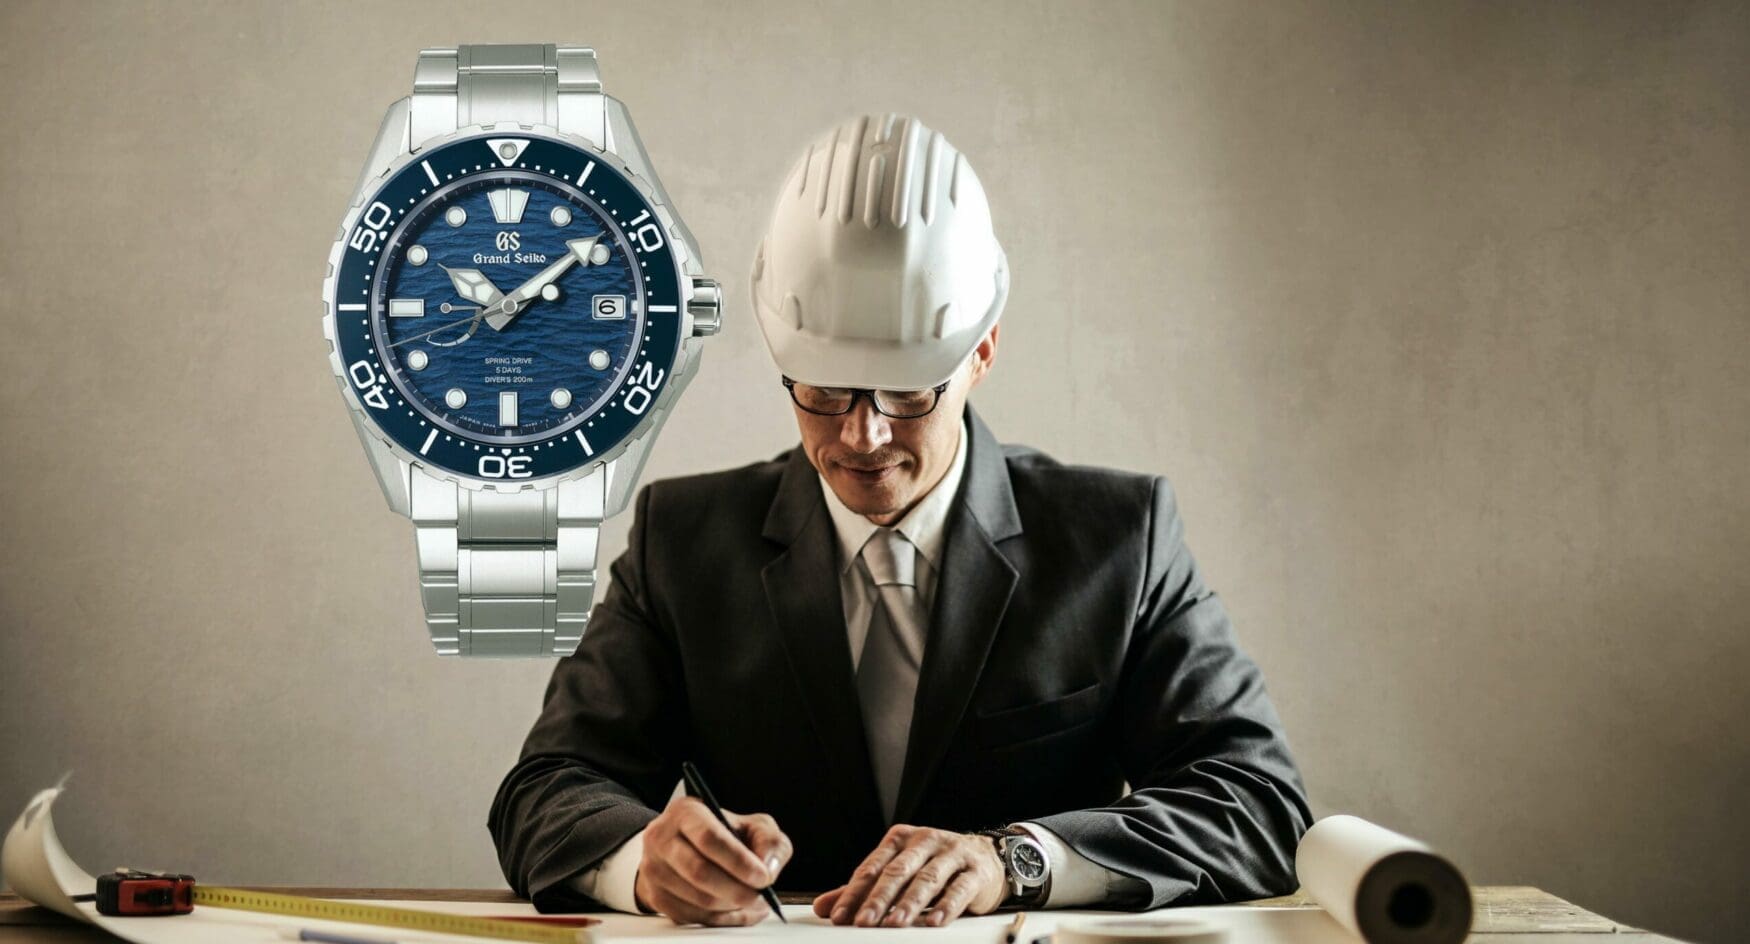 WHAT IF… Grand Seiko finally made a smaller dive watch